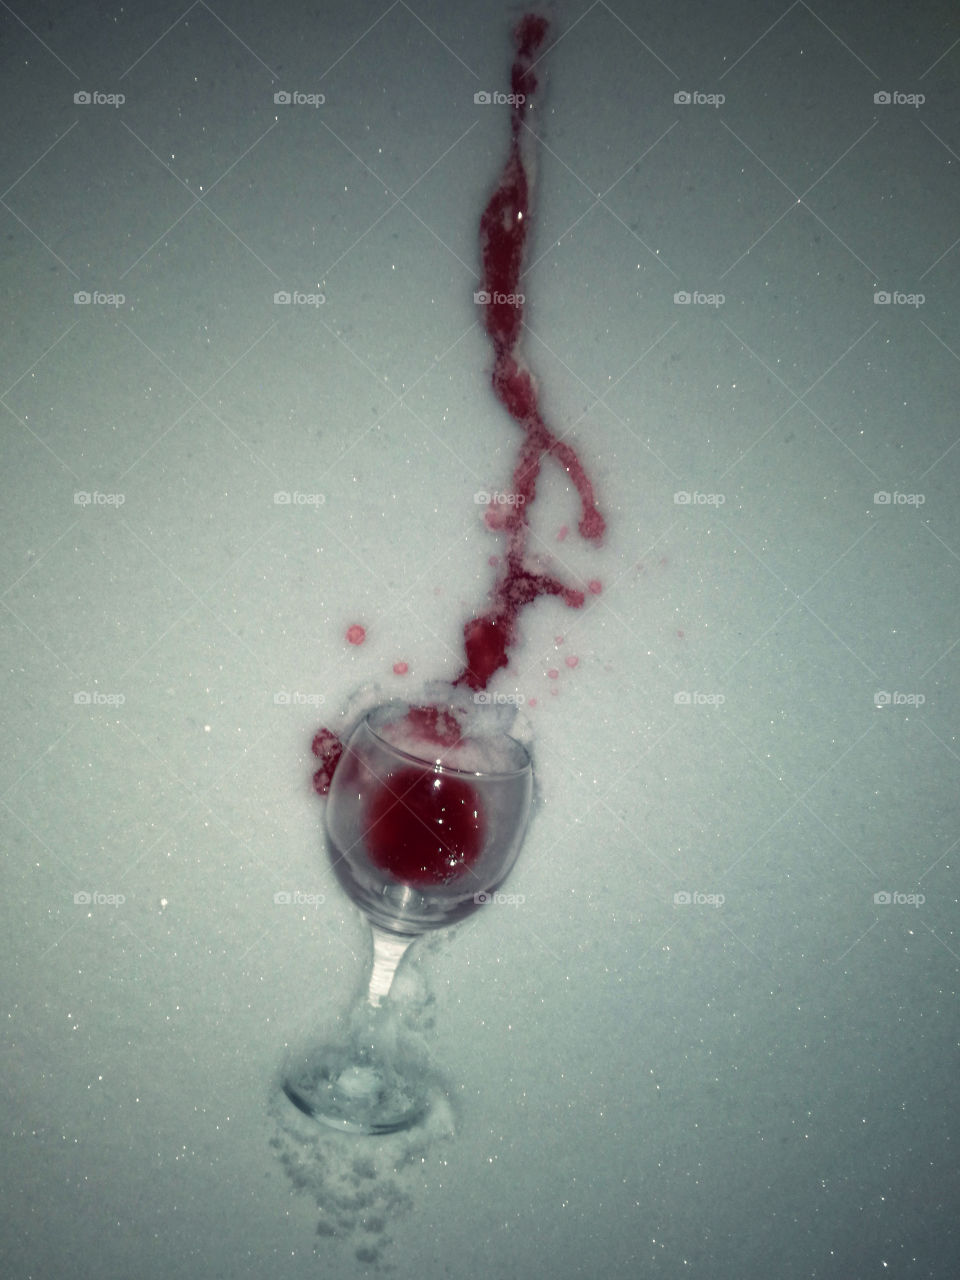 spilled red wine on the snow